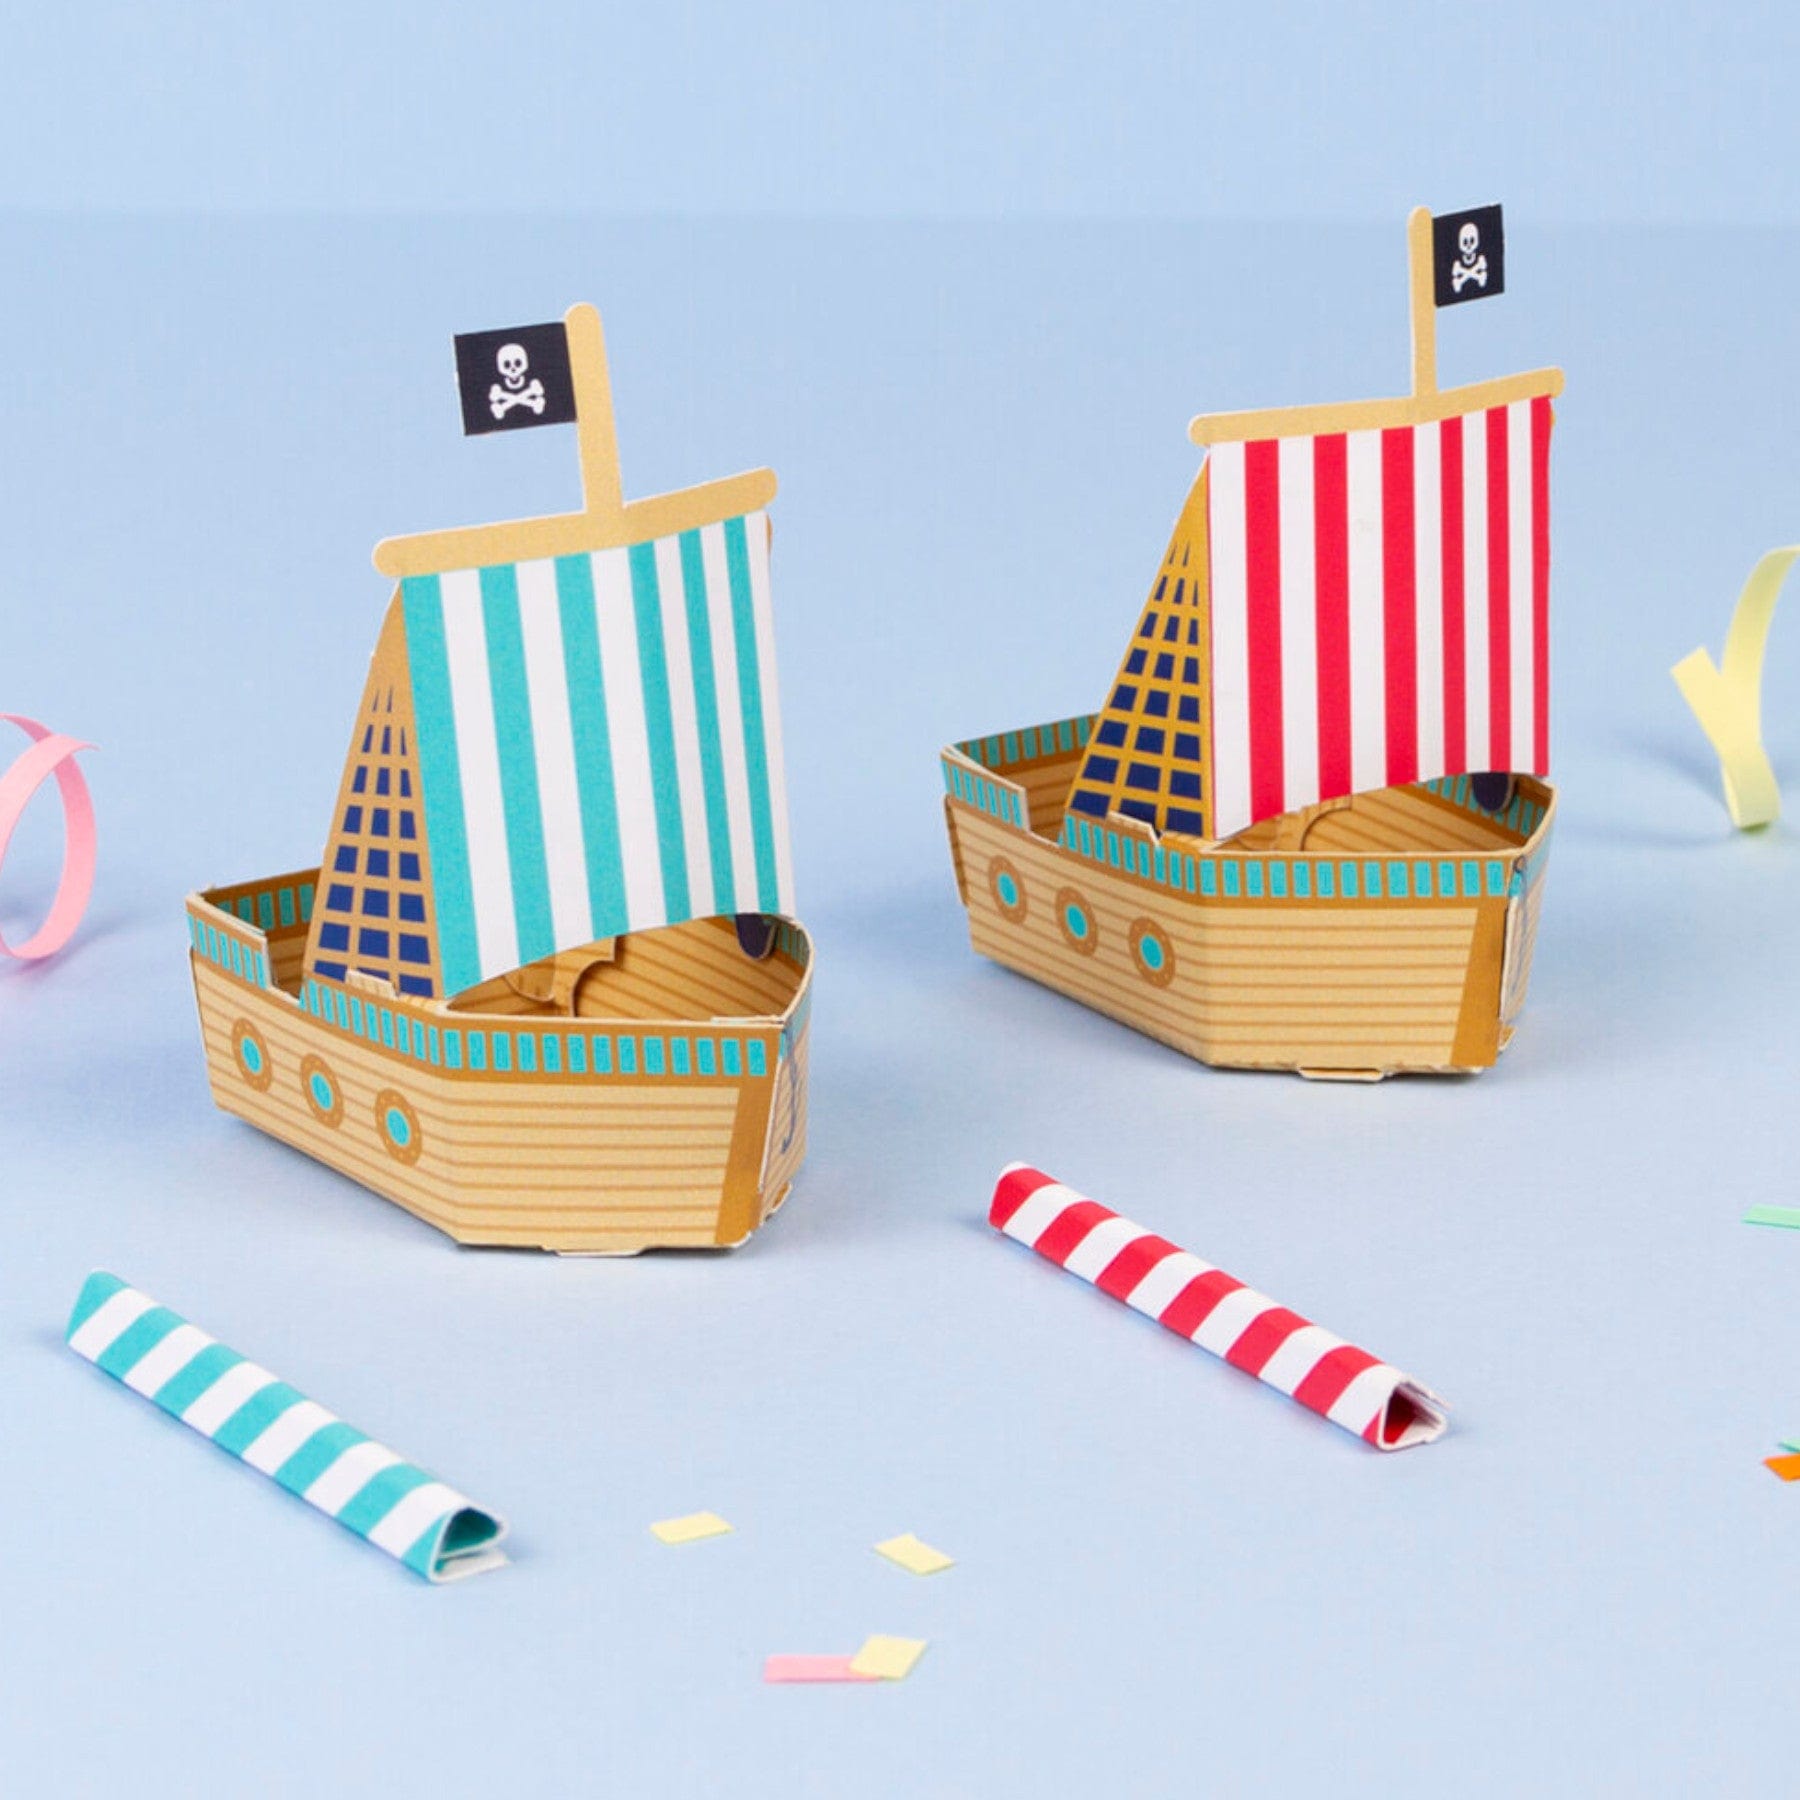 Create your own pirate blow boats